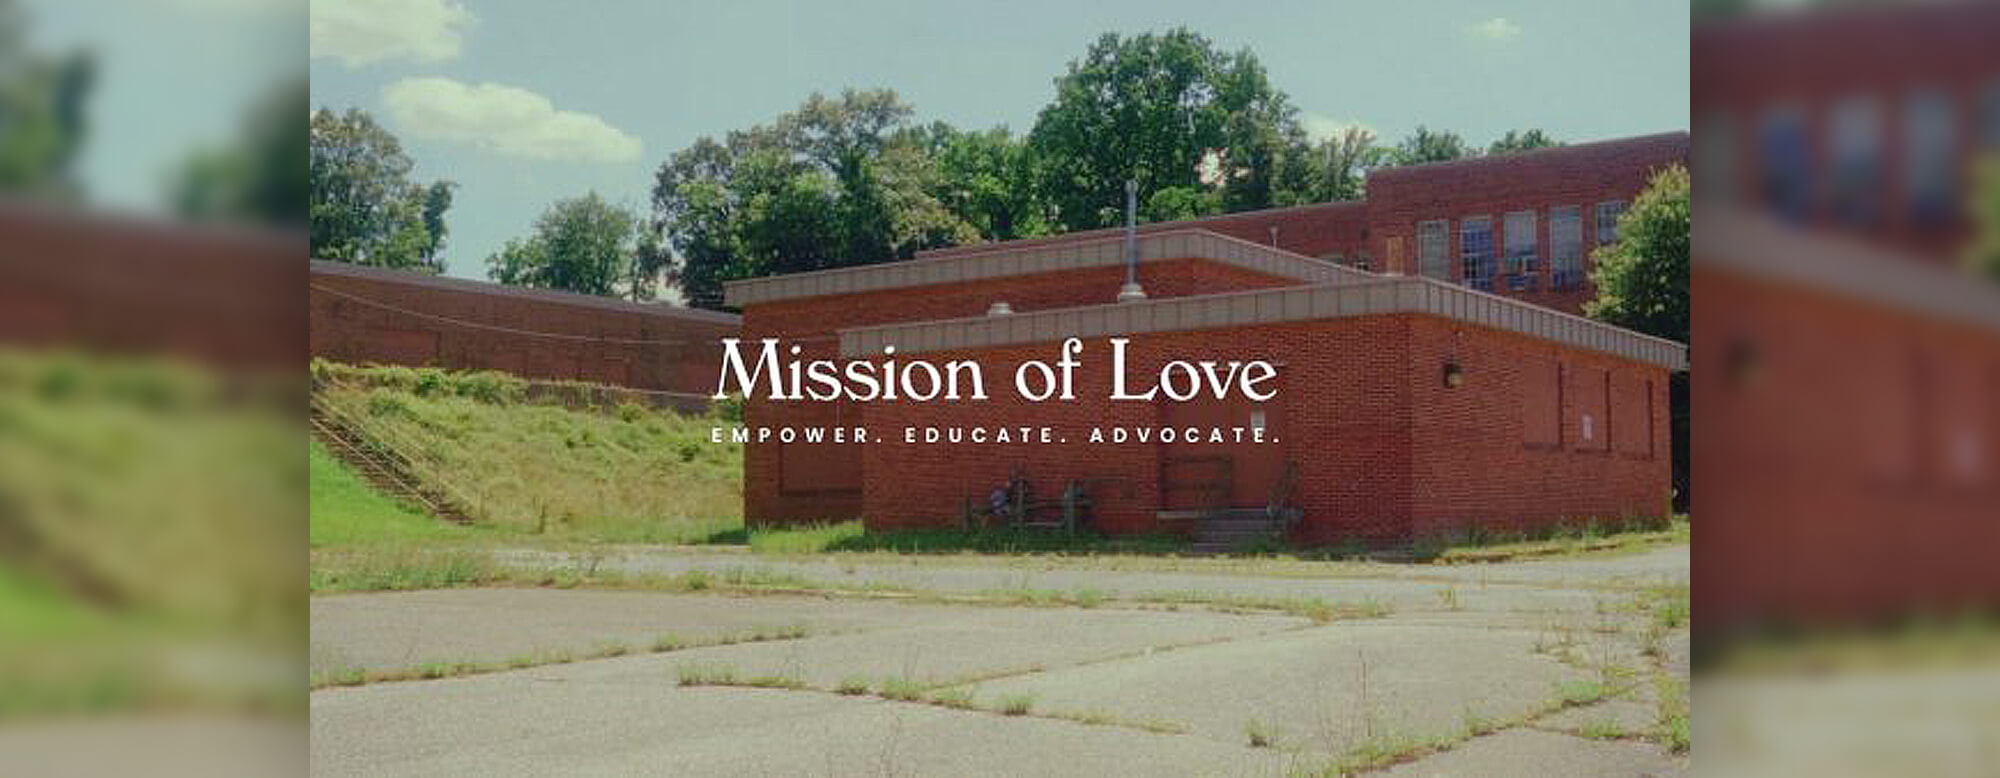 Mission of Love Charities New Building Campaign